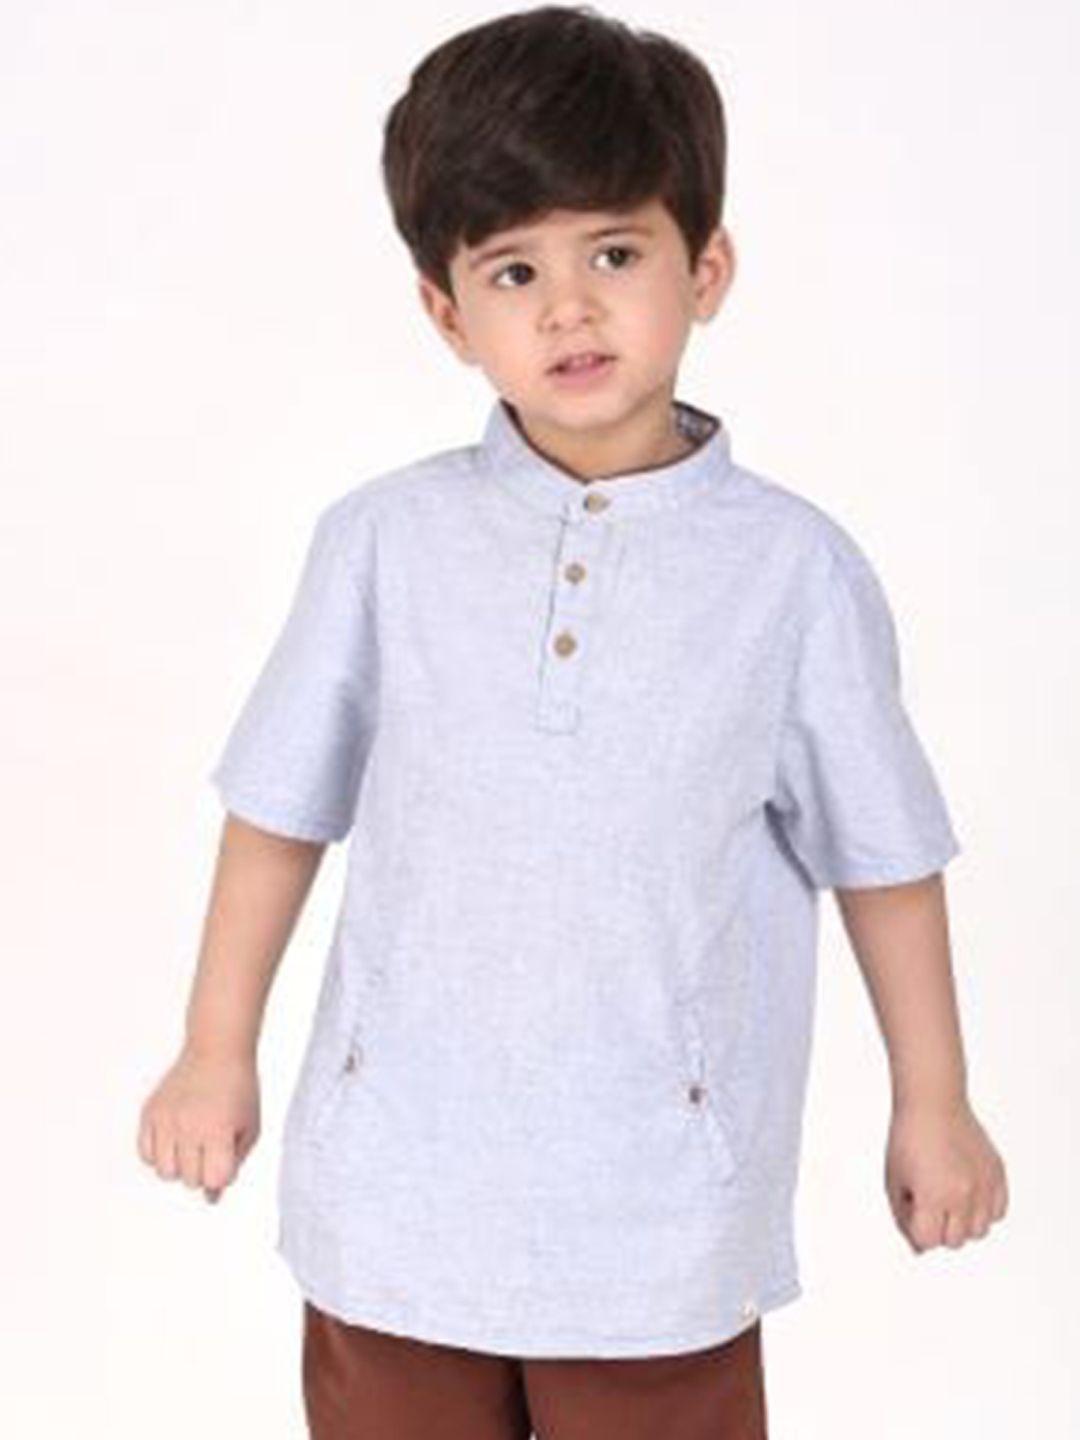 biglilpeople-boys-white-&-brown-solid-cotton-blend-clothing-set